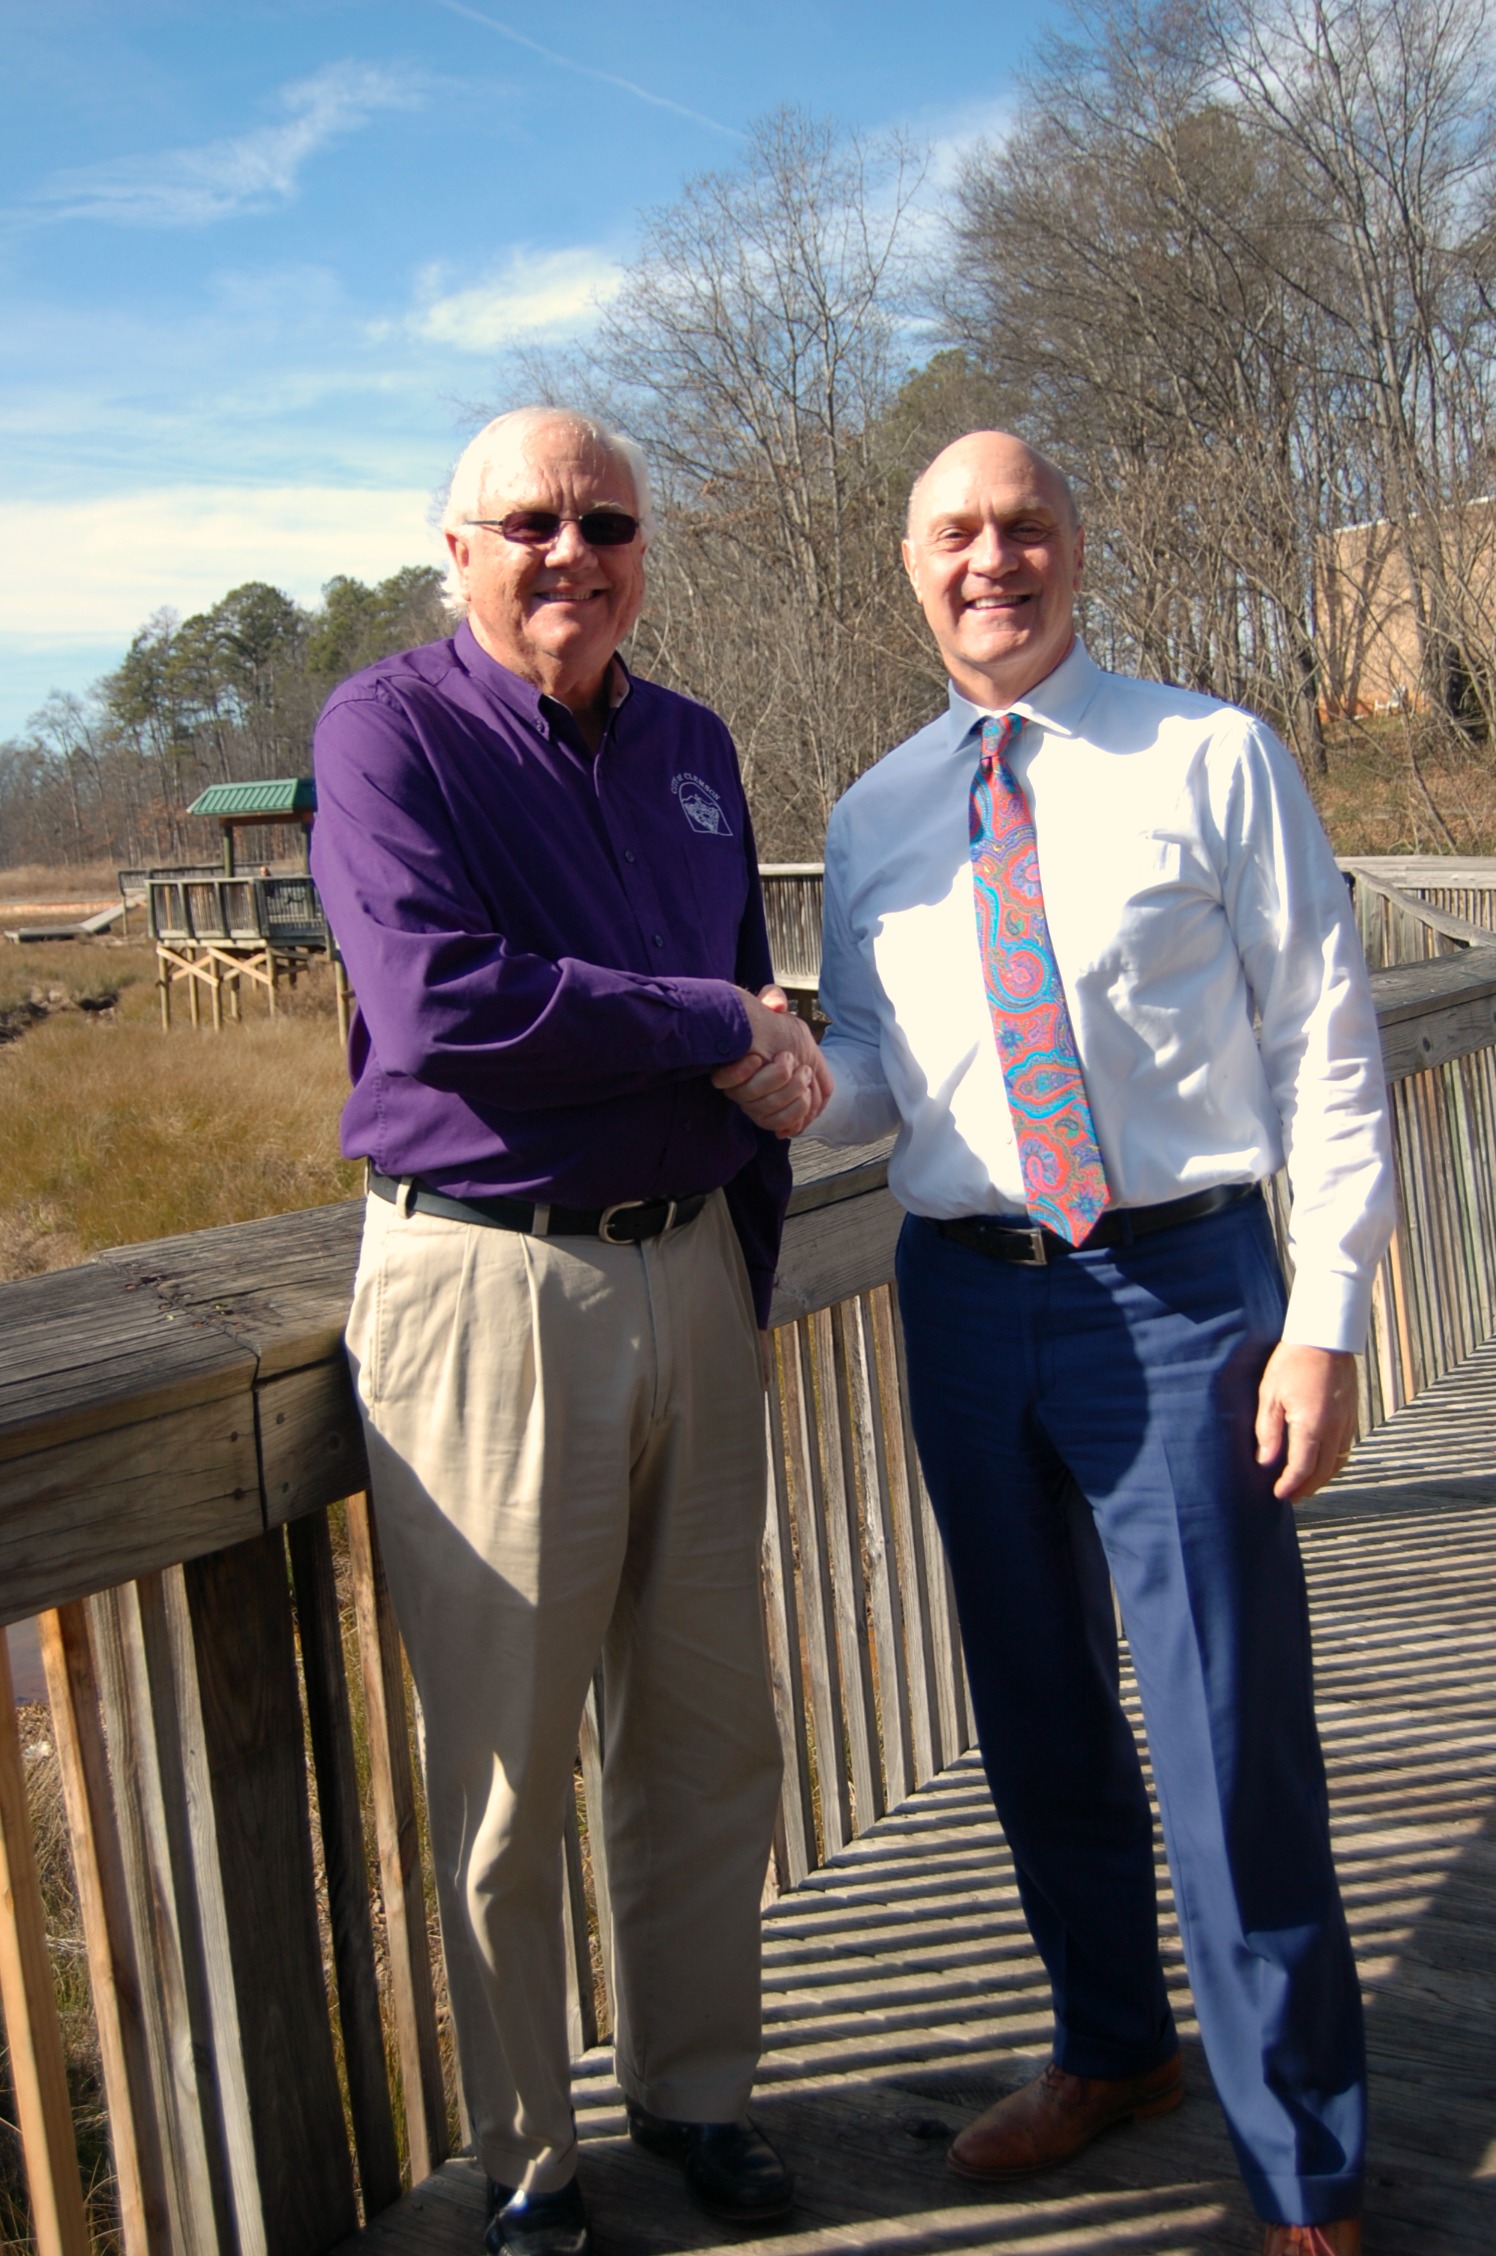 Mayor Cook and President Clements at Abernathy Park